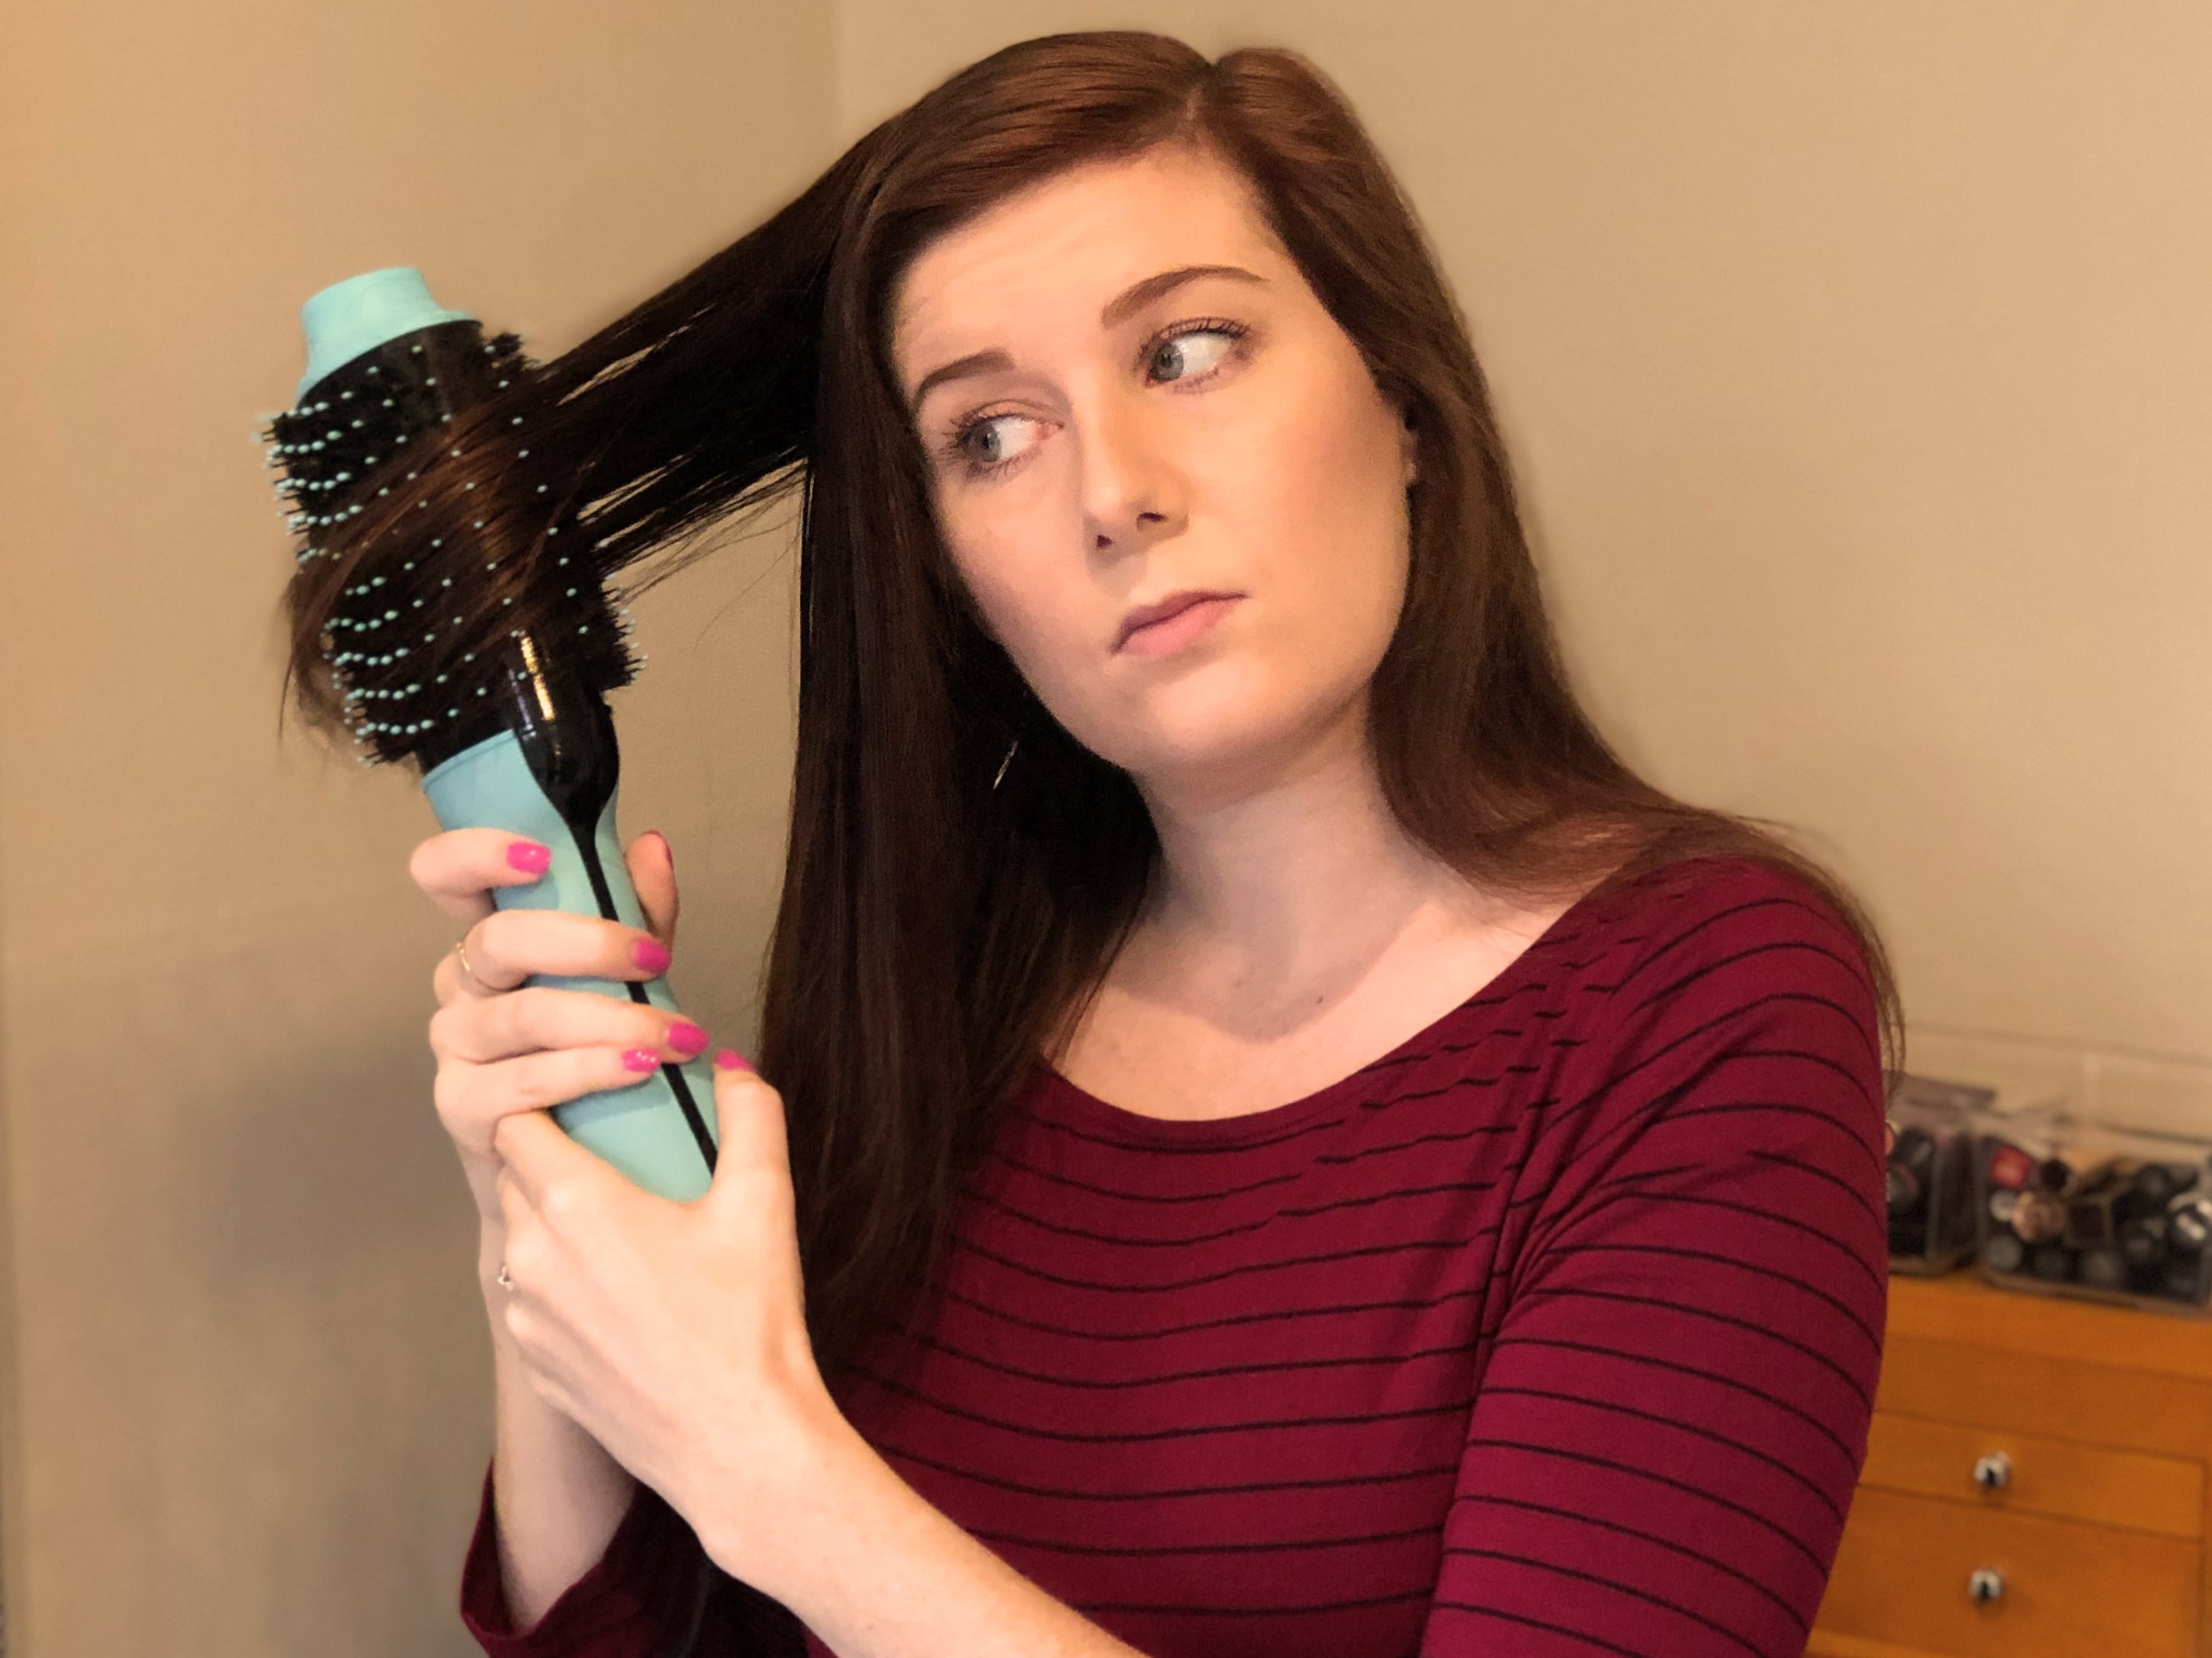 Revlon One-Step Hair Dryer on natural hair: Does it actually work? -  Reviewed